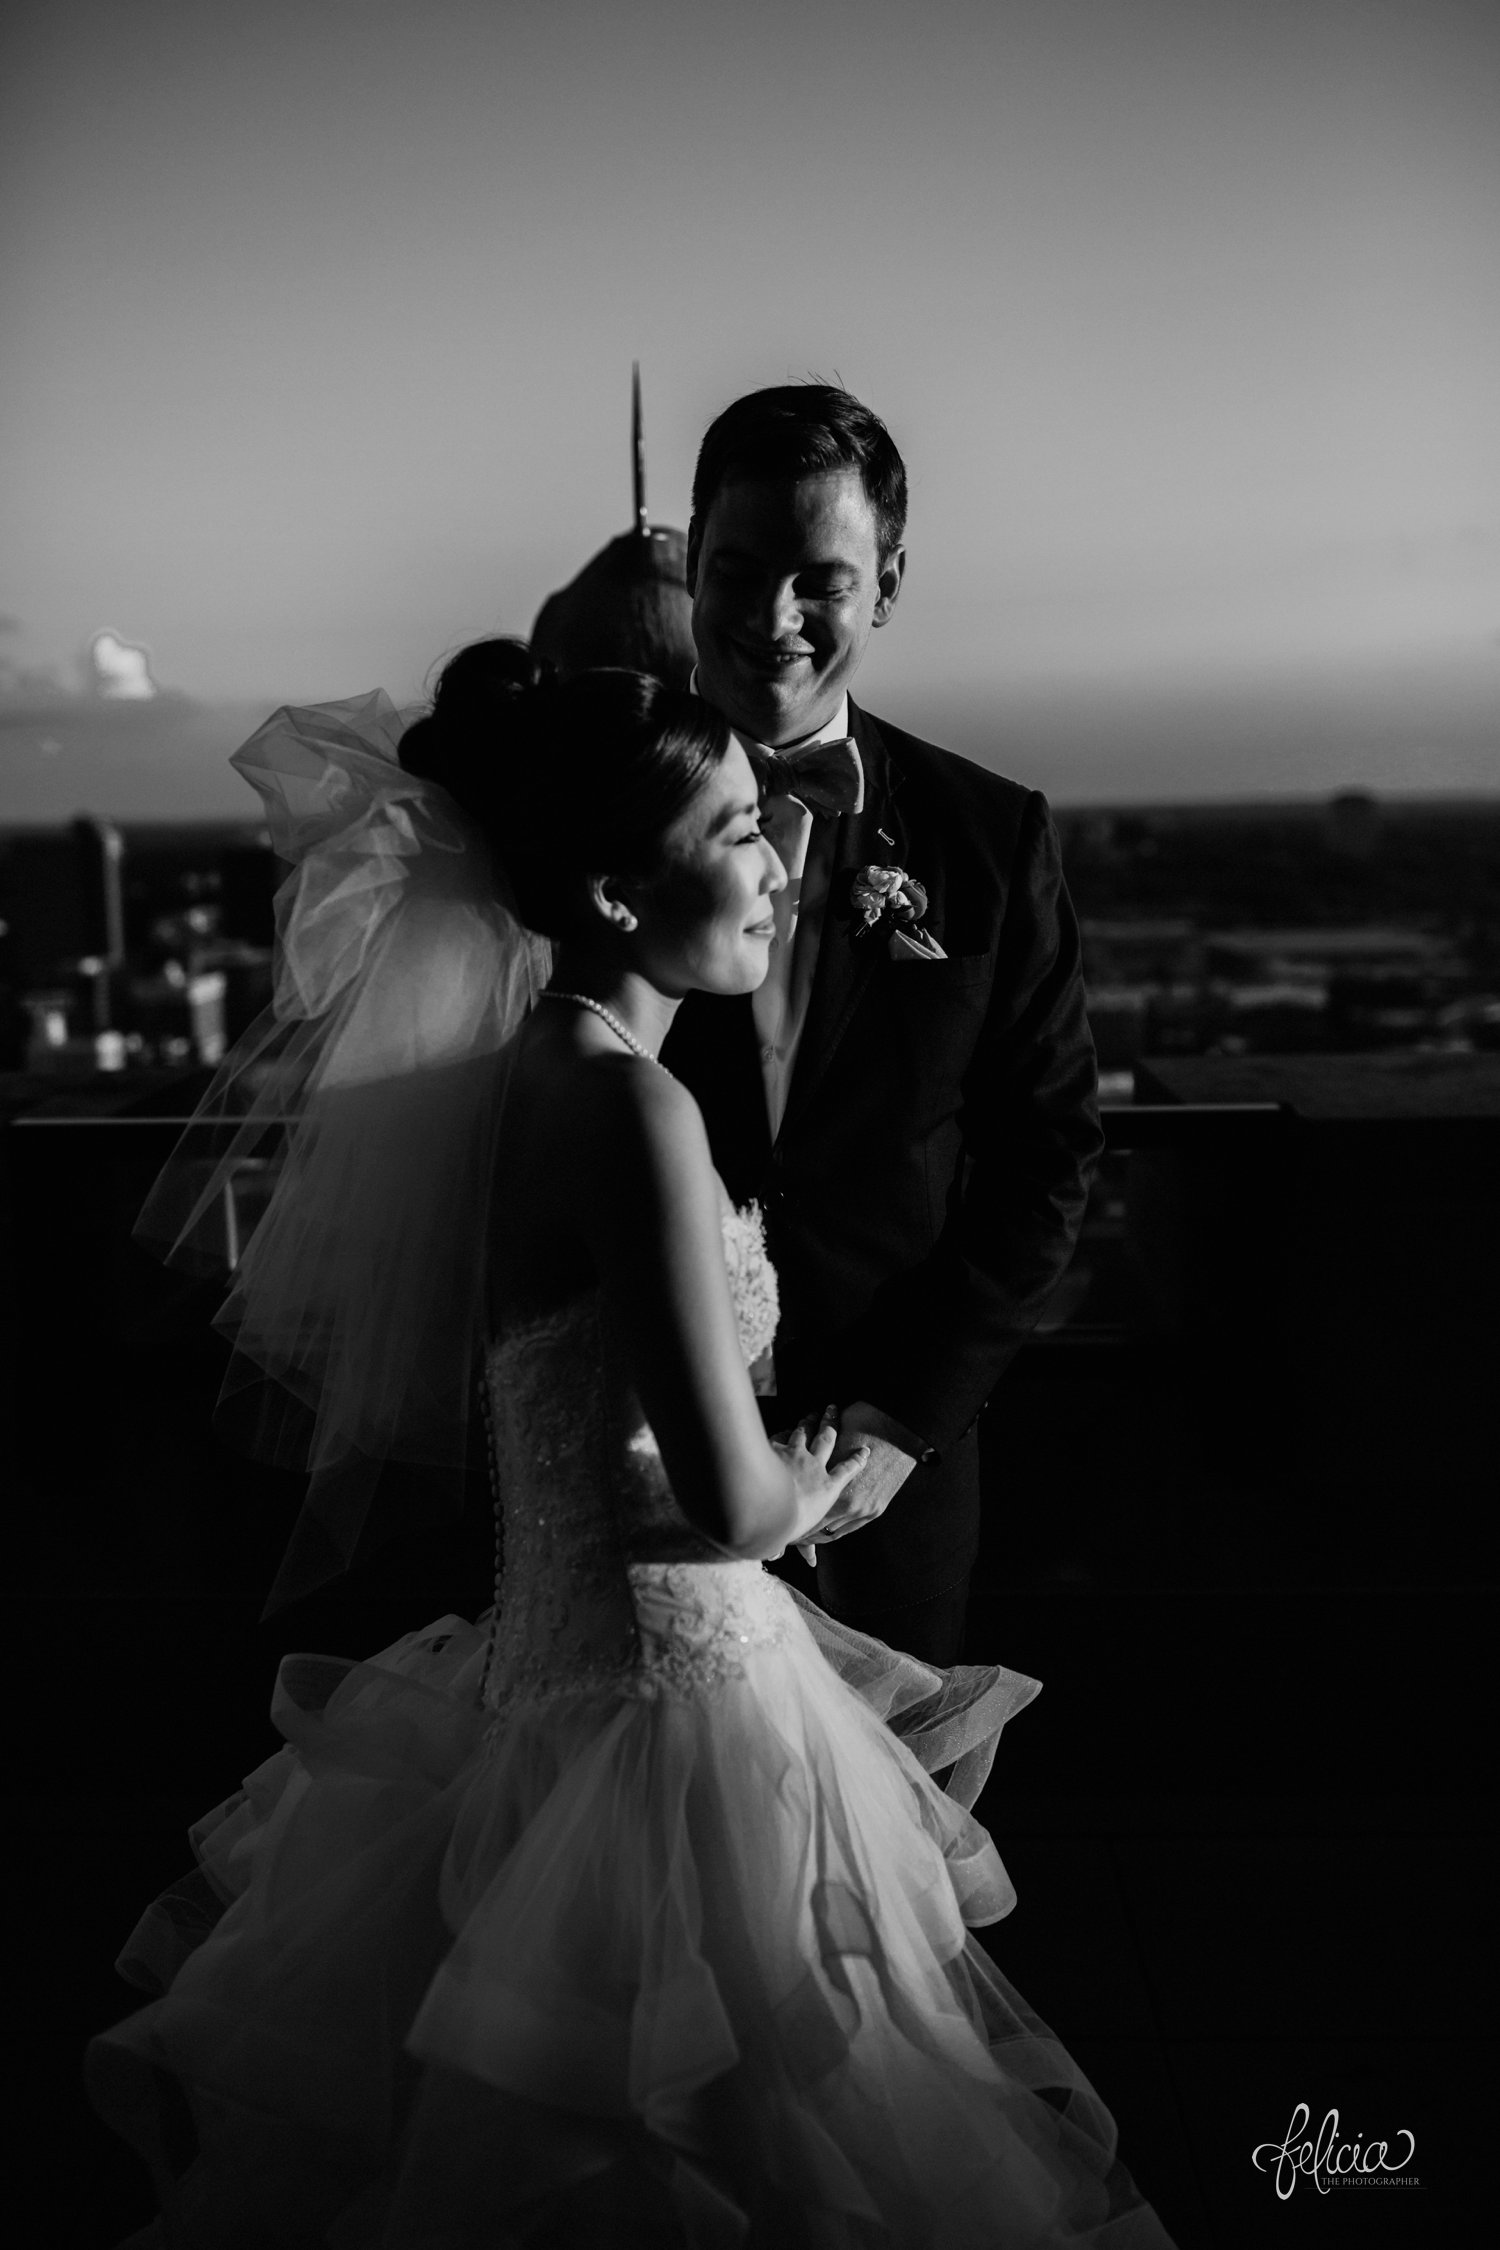 images by feliciathephotographer.com | destination wedding photographer | the grand hall at power and light | kansas city | missouri | downtown | glamorous | multicultural | black and white | couple portrait | dramatic lighting | sunset | golden hour | 